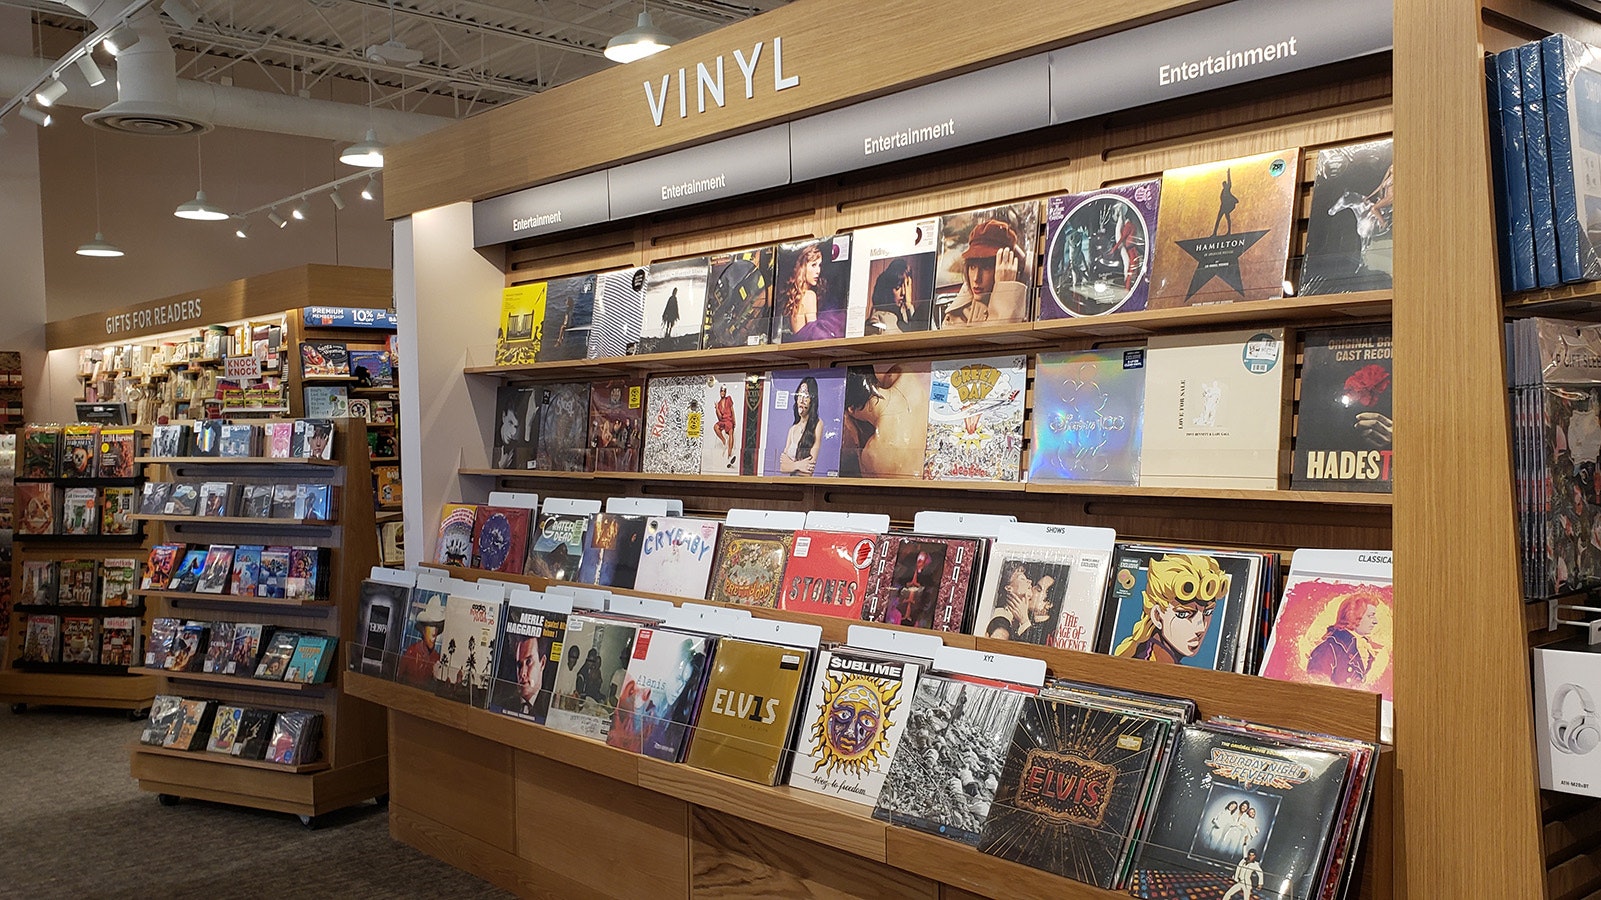 There's even a section of vinyl records for collectors at the new Cheyenne Barnes & Noble.